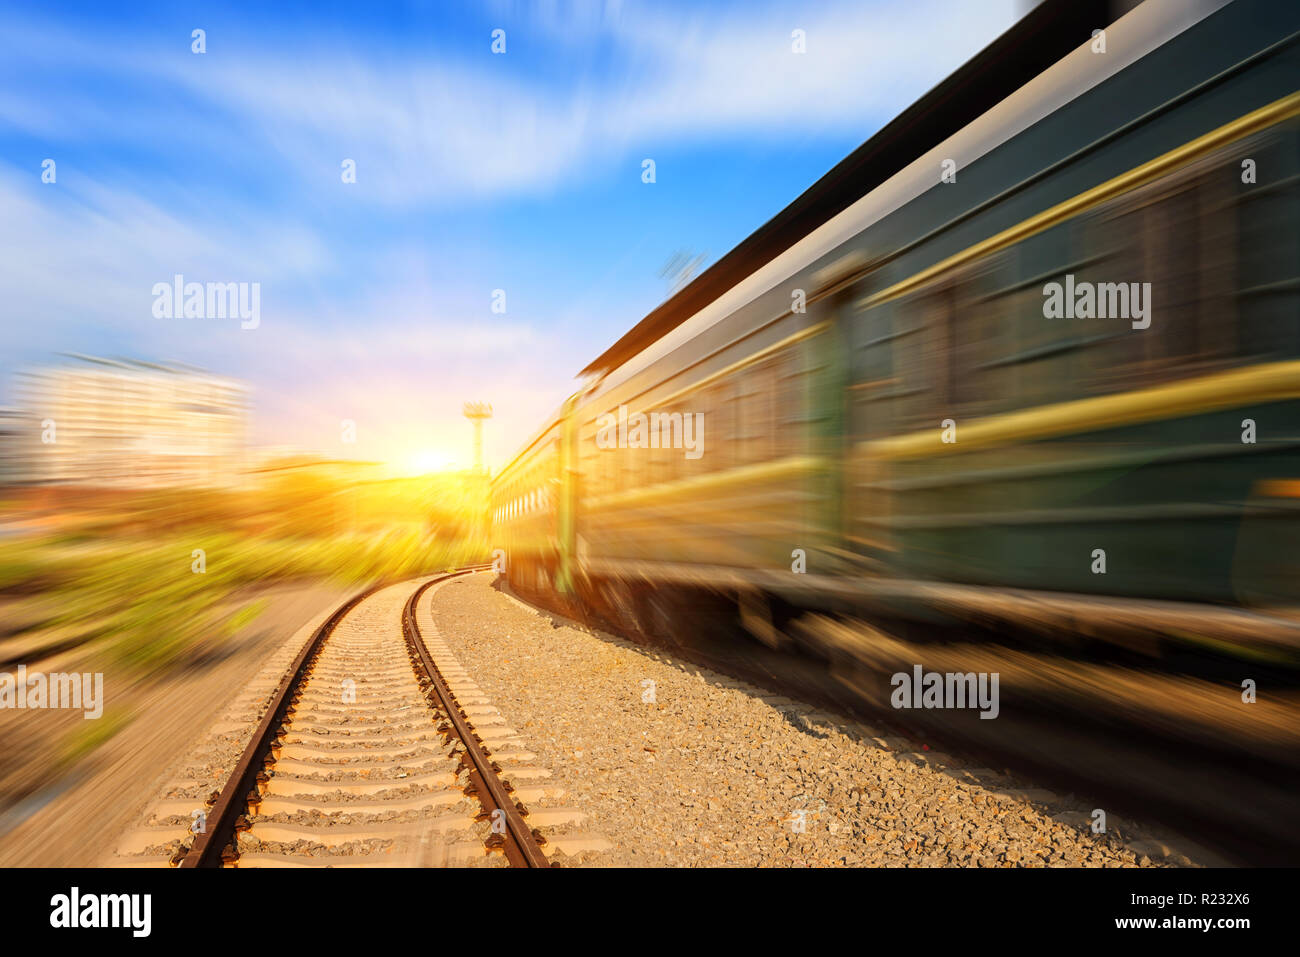 Cargo train platform at sunset with container Stock Photo